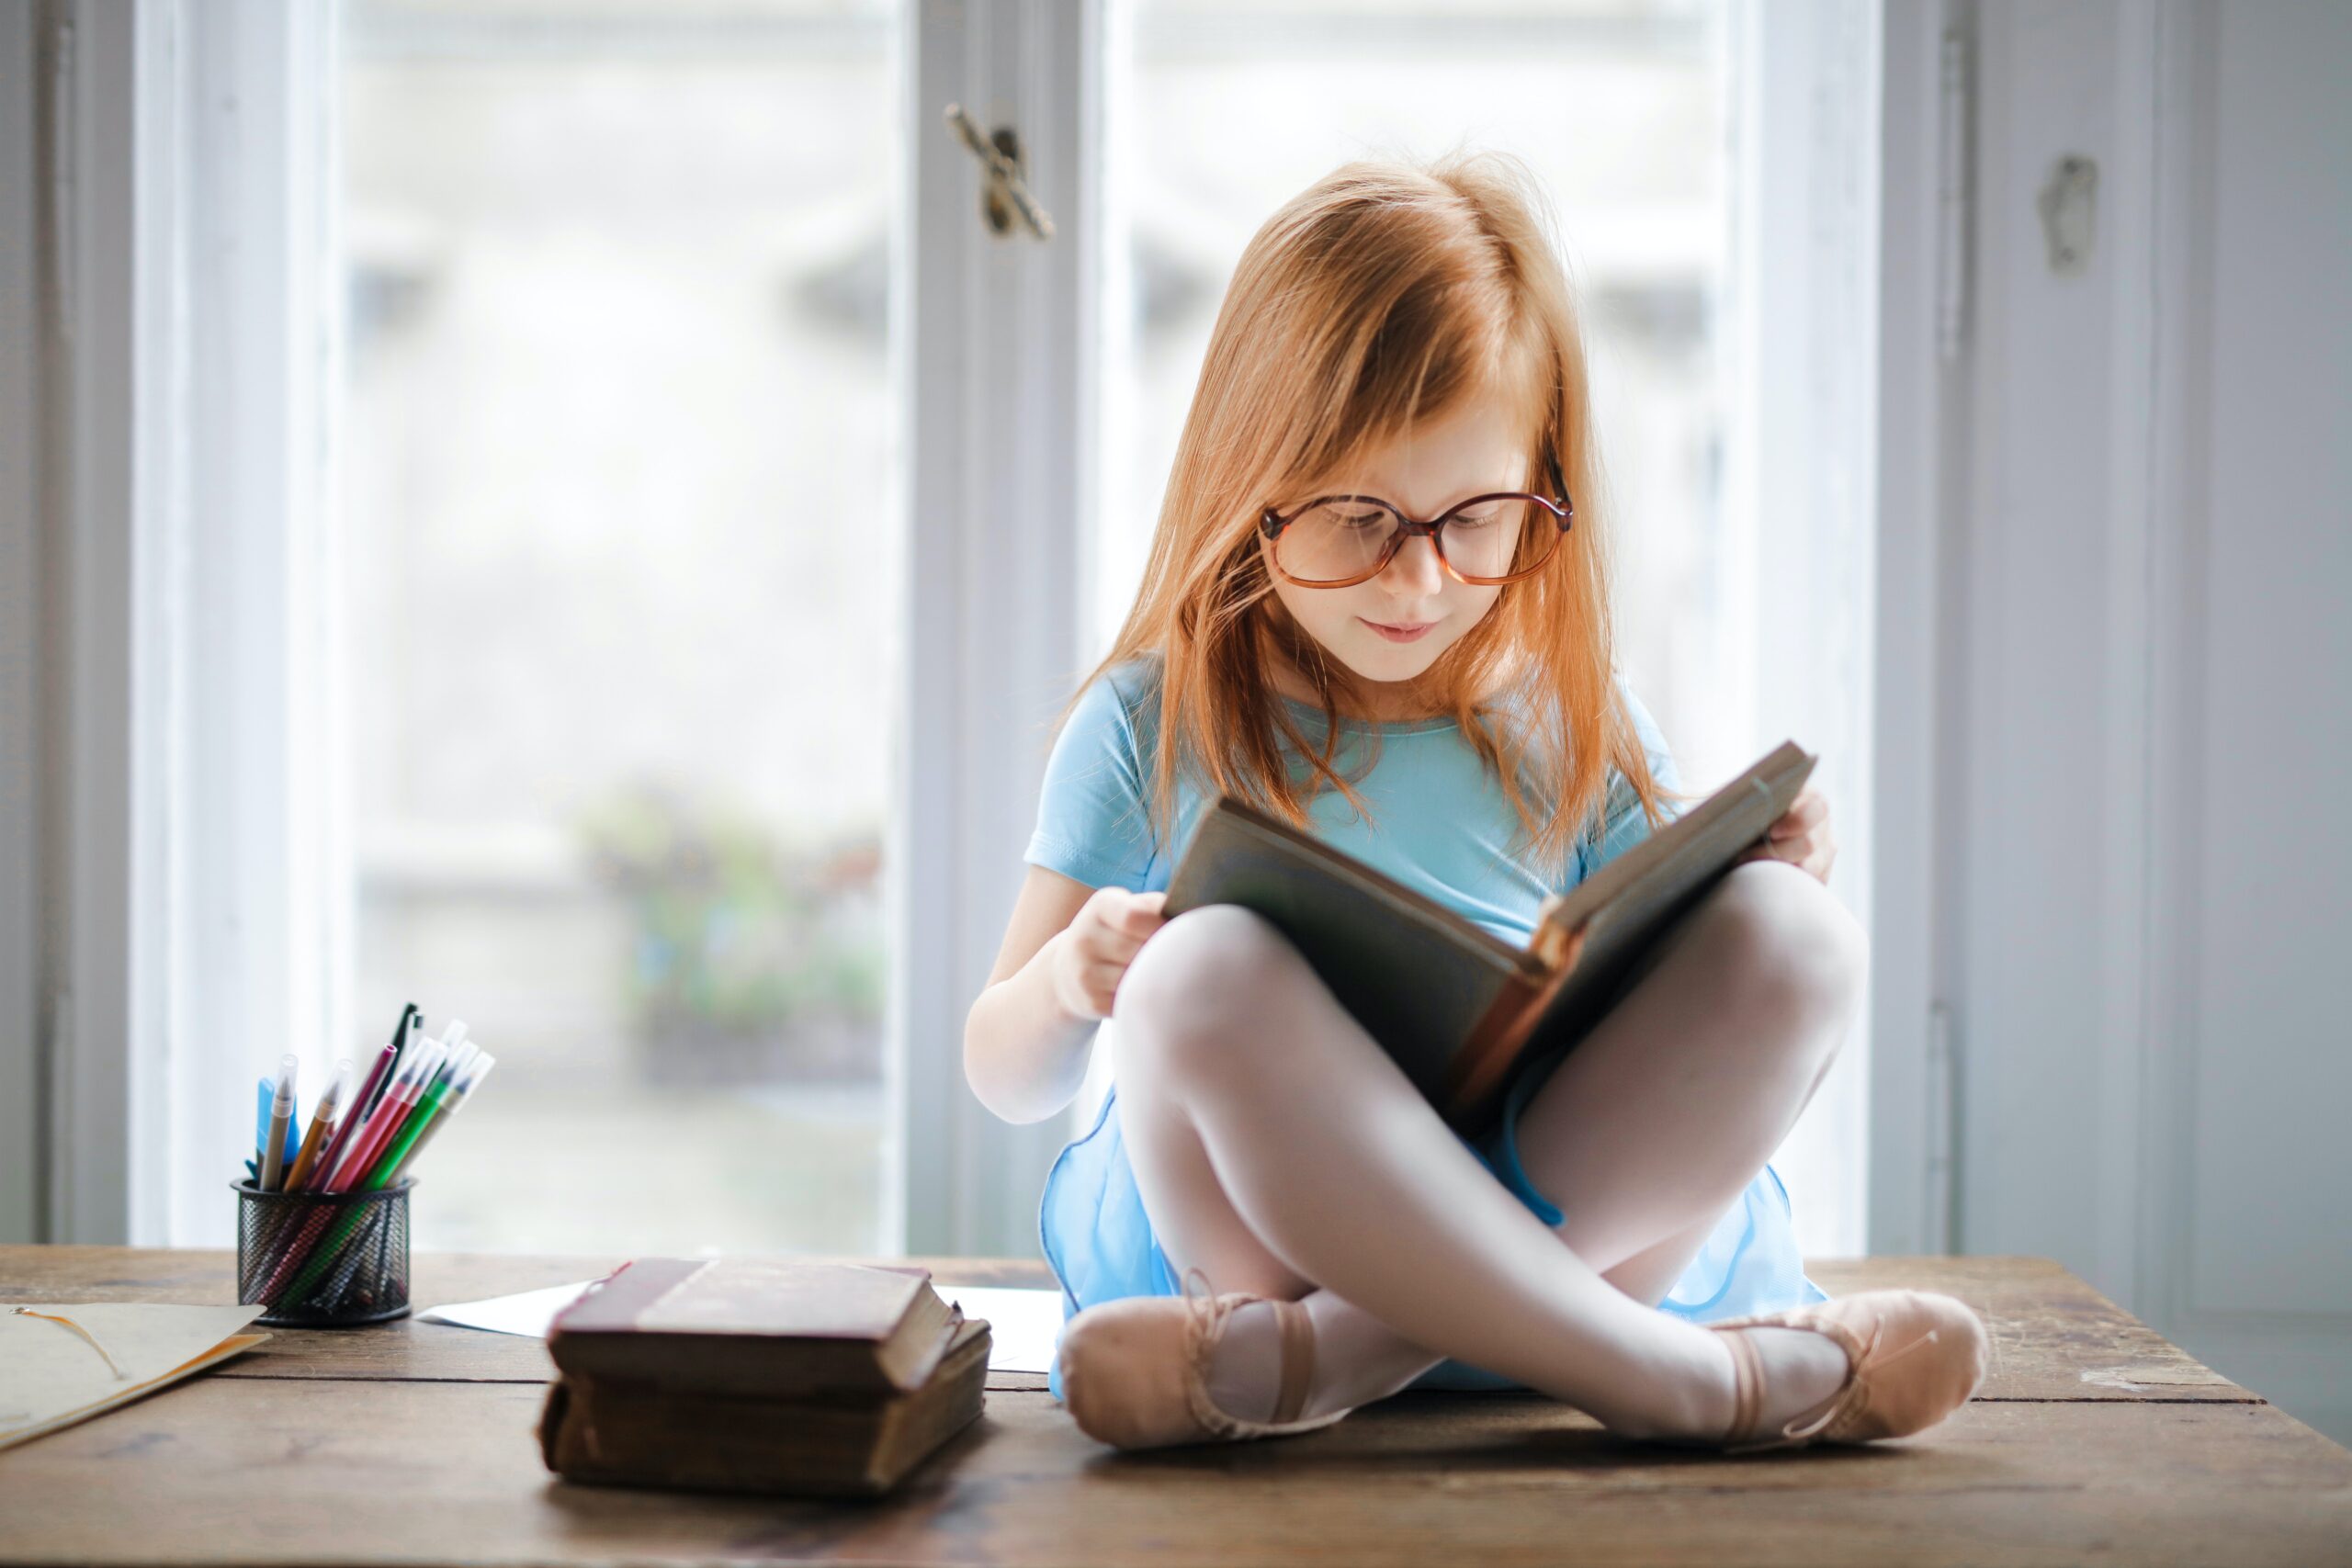 A child with long hair and glasses sits on top of a table reading a book.